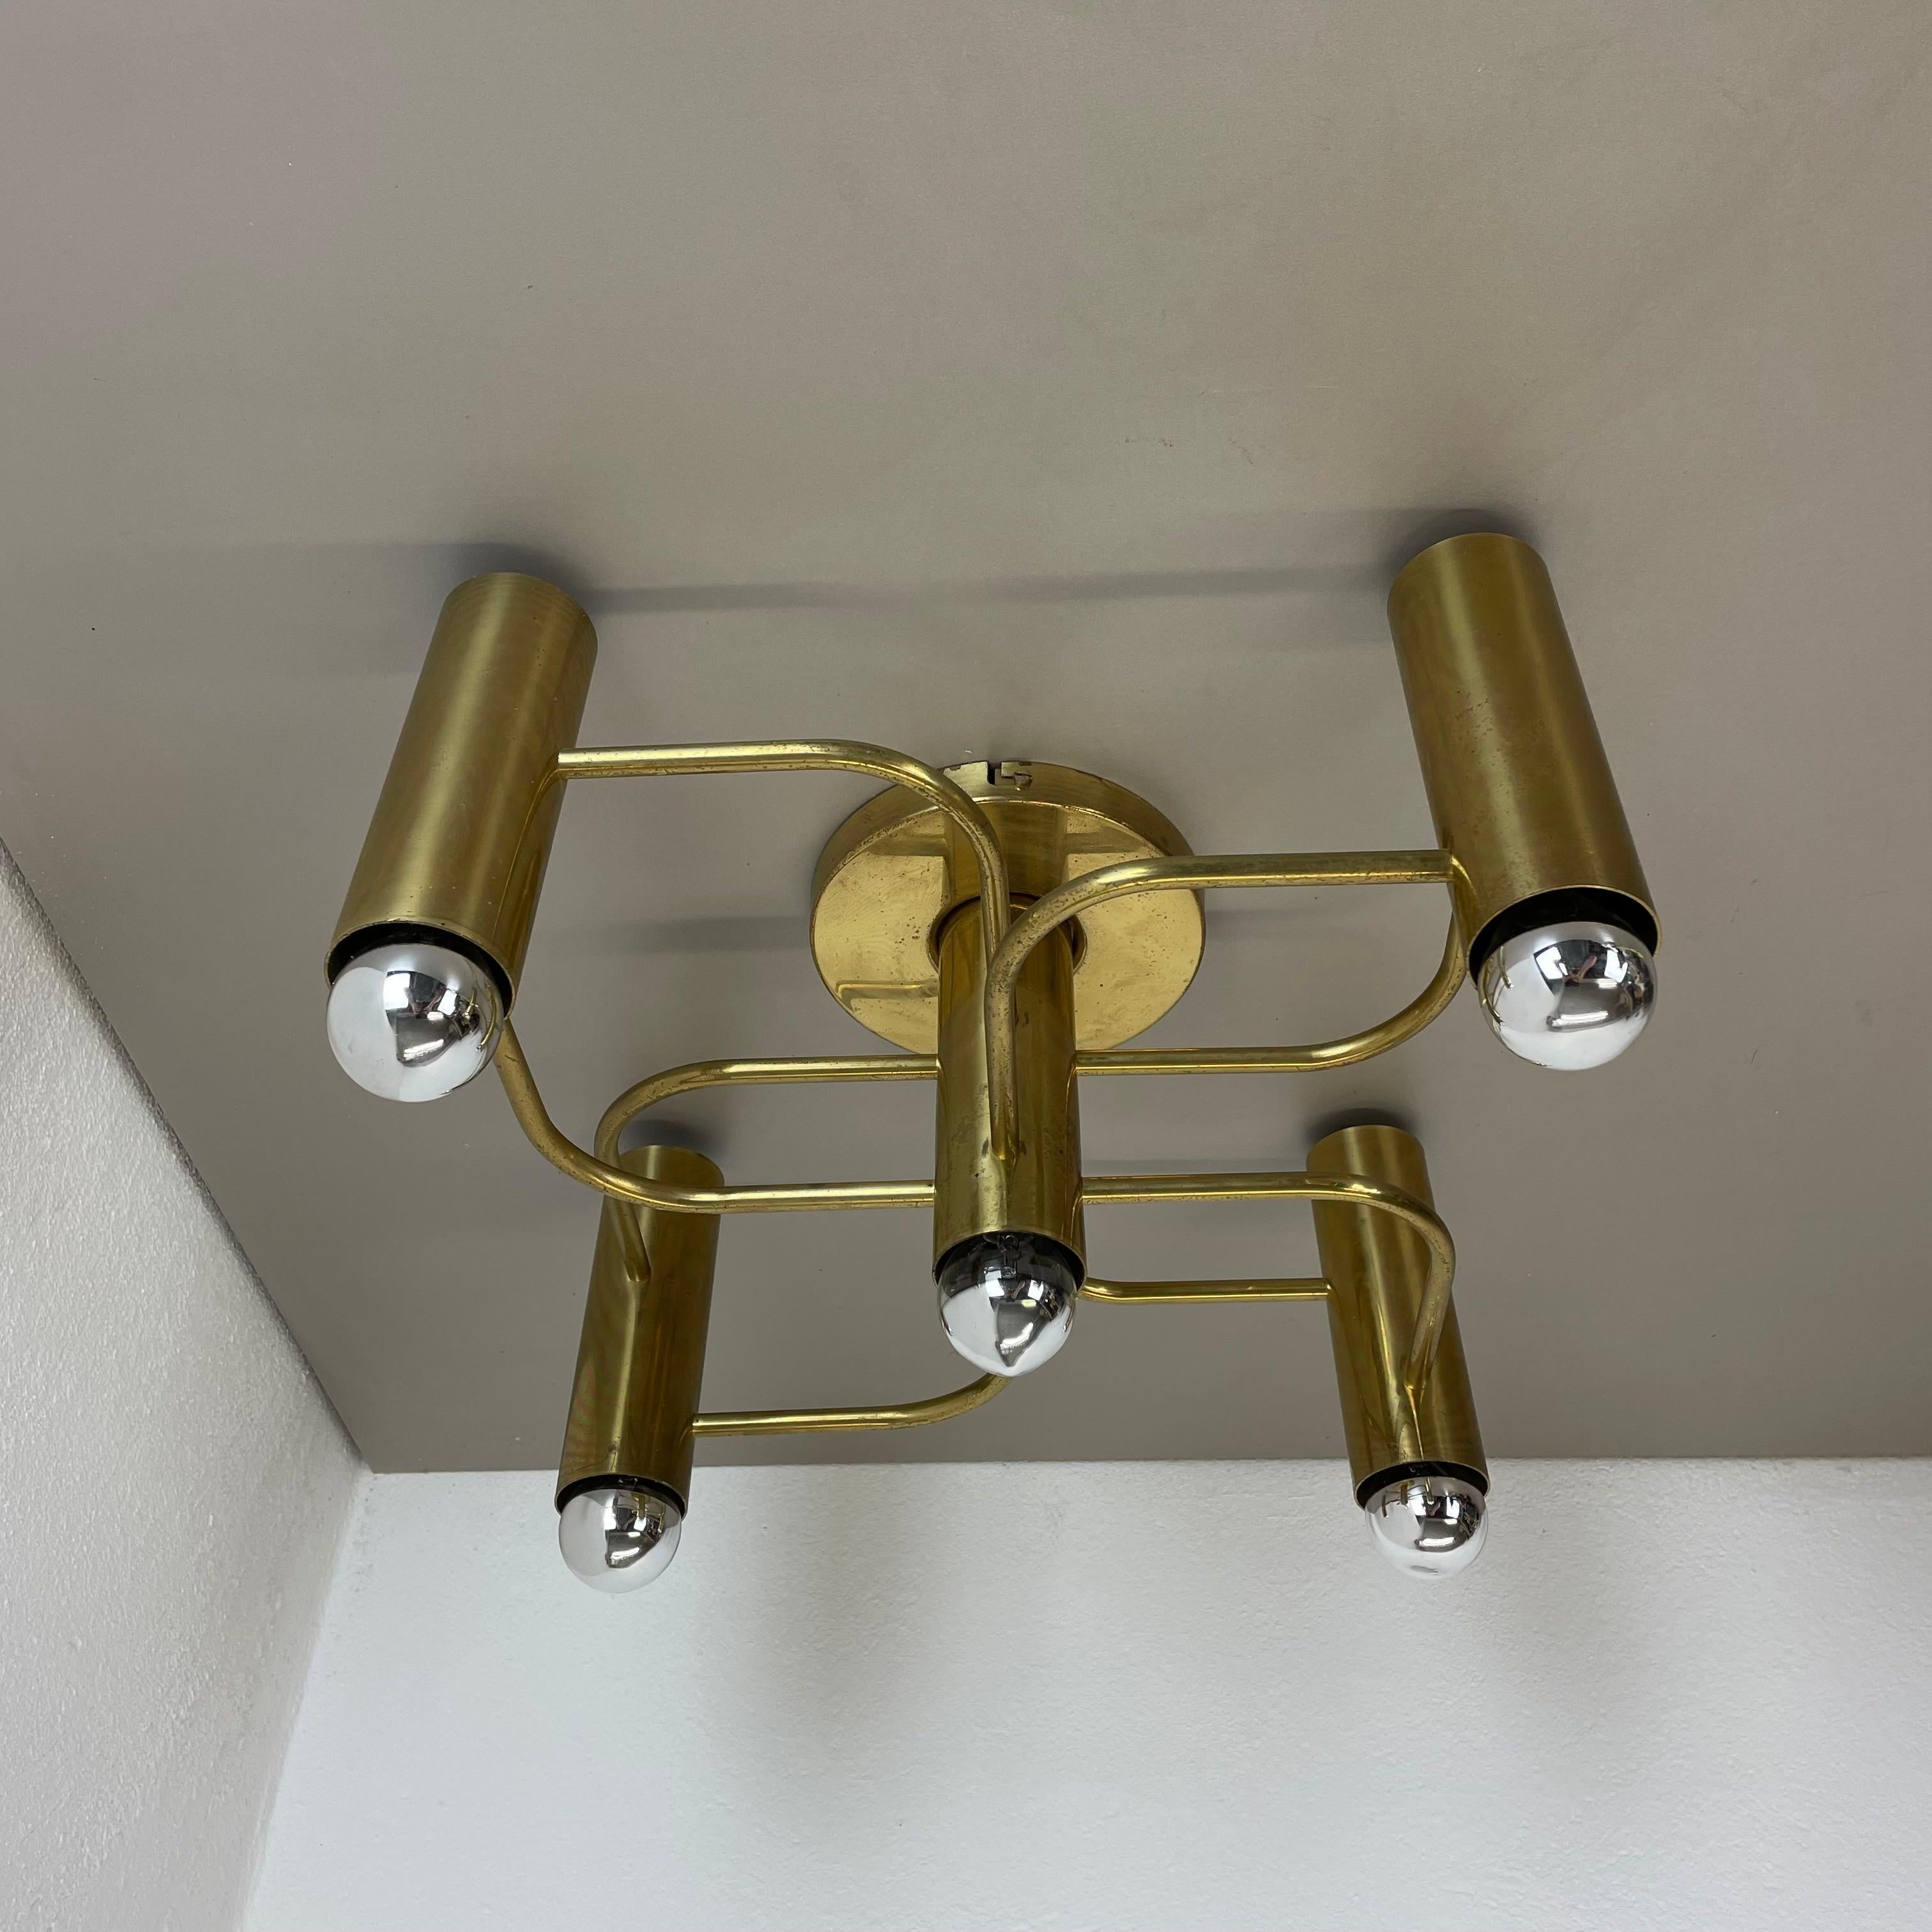 Beautiful 5-Light Sciolari Ceiling Light Sconces By LEOLA Leuchten Germany 1970s In Good Condition For Sale In Kirchlengern, DE